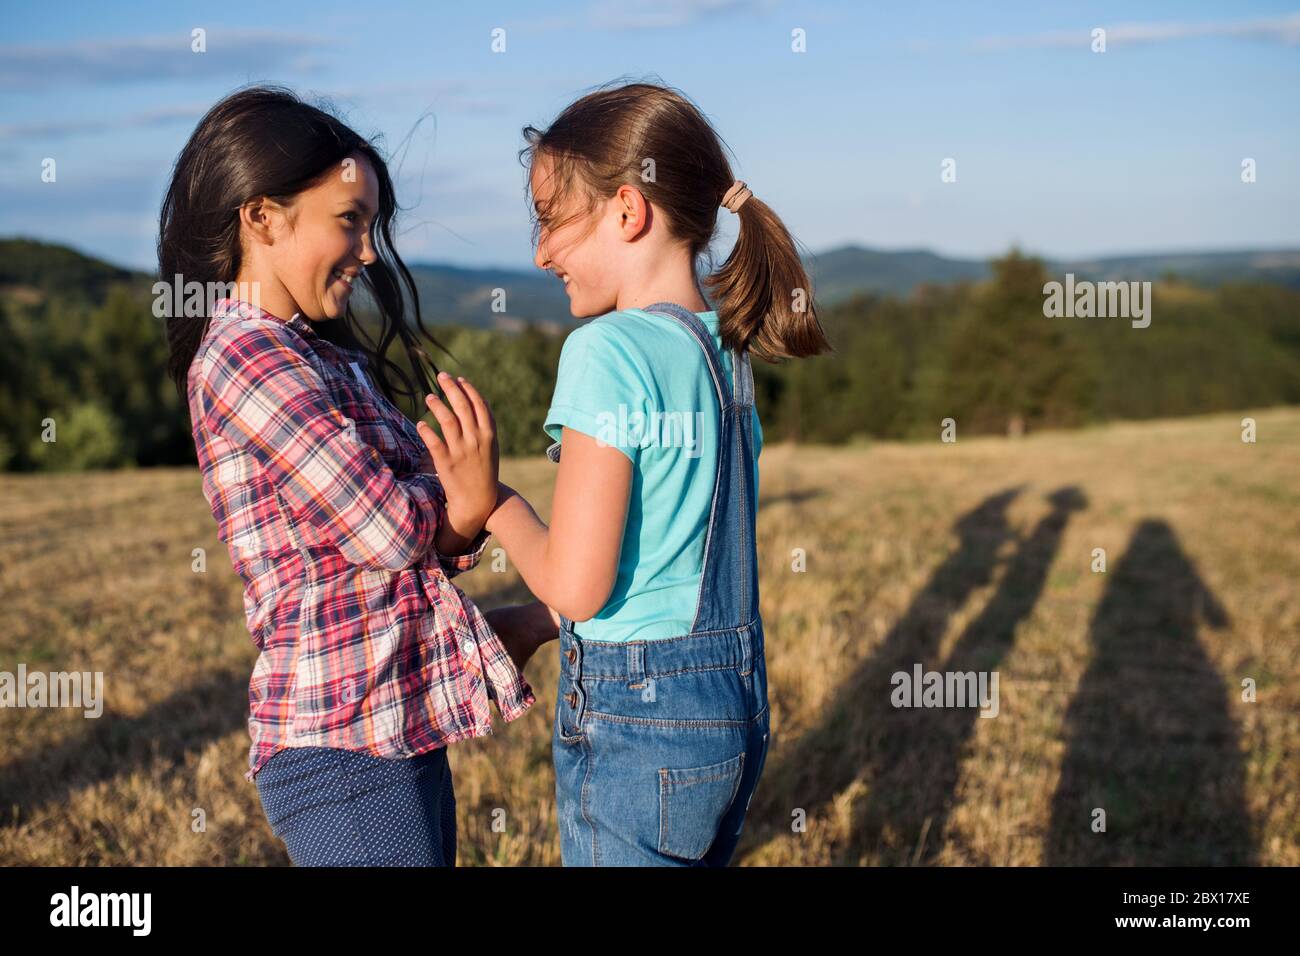 Two school children walking on field trip in nature, playing. Stock Photo